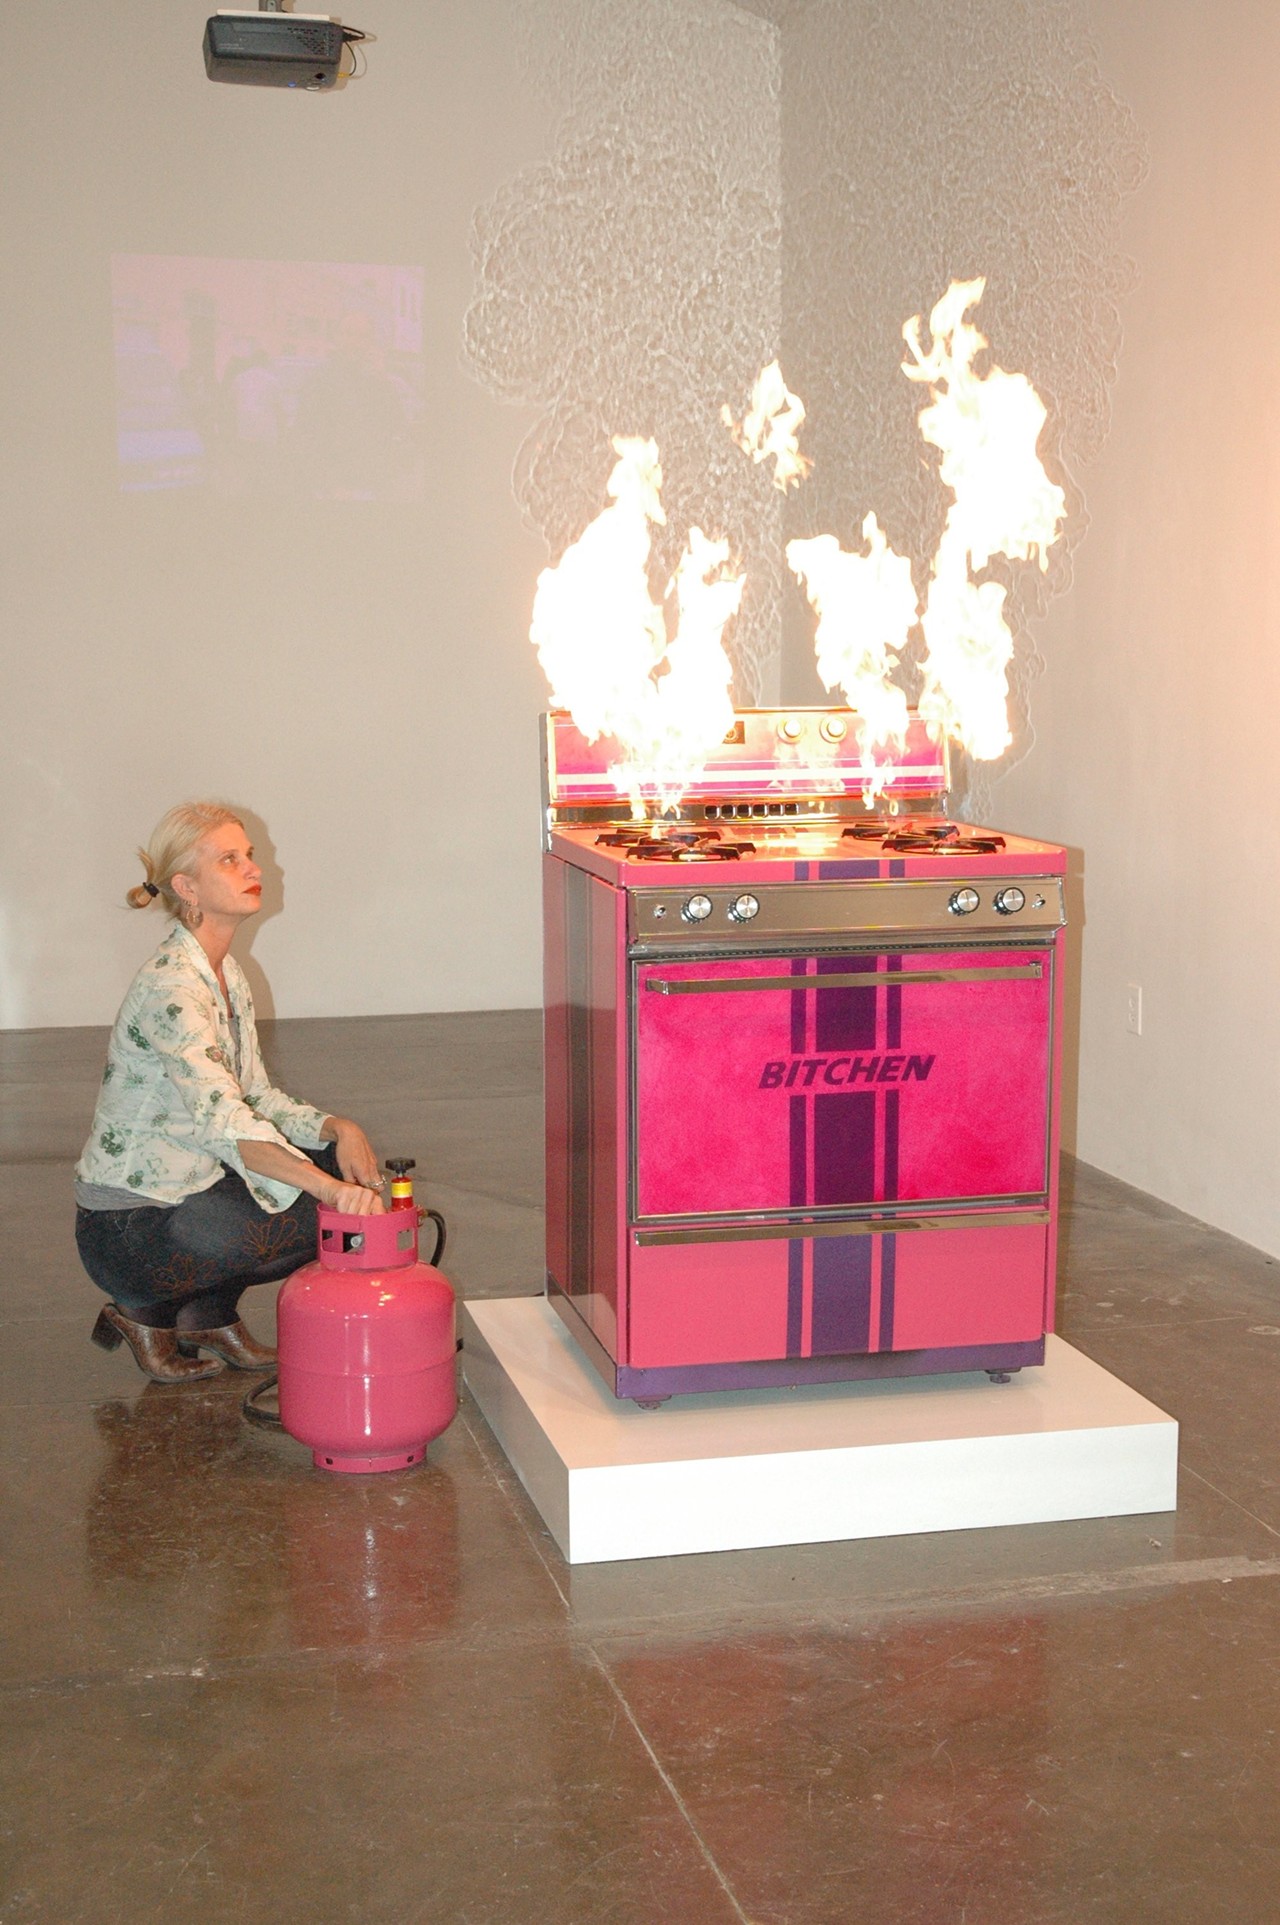 Katie Pell
Katie Pell's profile as a visual artist kicked into high gear with the 2006 opening of her Artpace residency exhibition “Bitchen," which used tricked-out appliances such as a pink, fire-breathing stove to fuse feminism and lowrider culture. Beyond her bold visual sense, the local arts community valued her as an educator and magnetic personality. She died in 2019 at the age of 54.
Photo by Kimberly Aubuchon